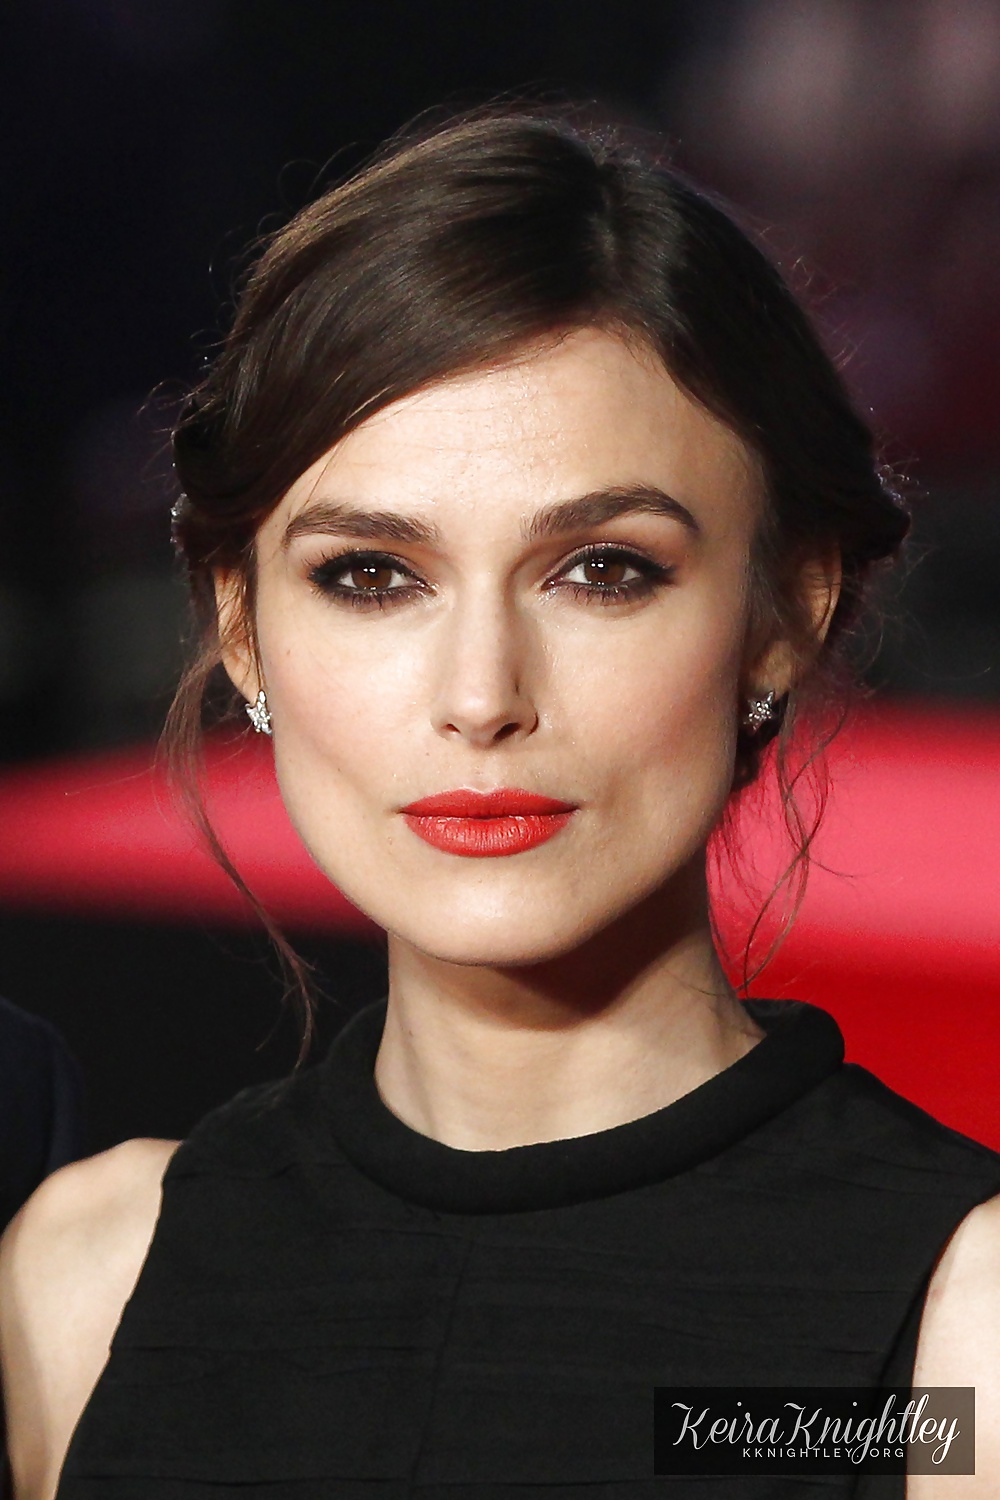 Keira Knightley The Royal Lady of England #35649700